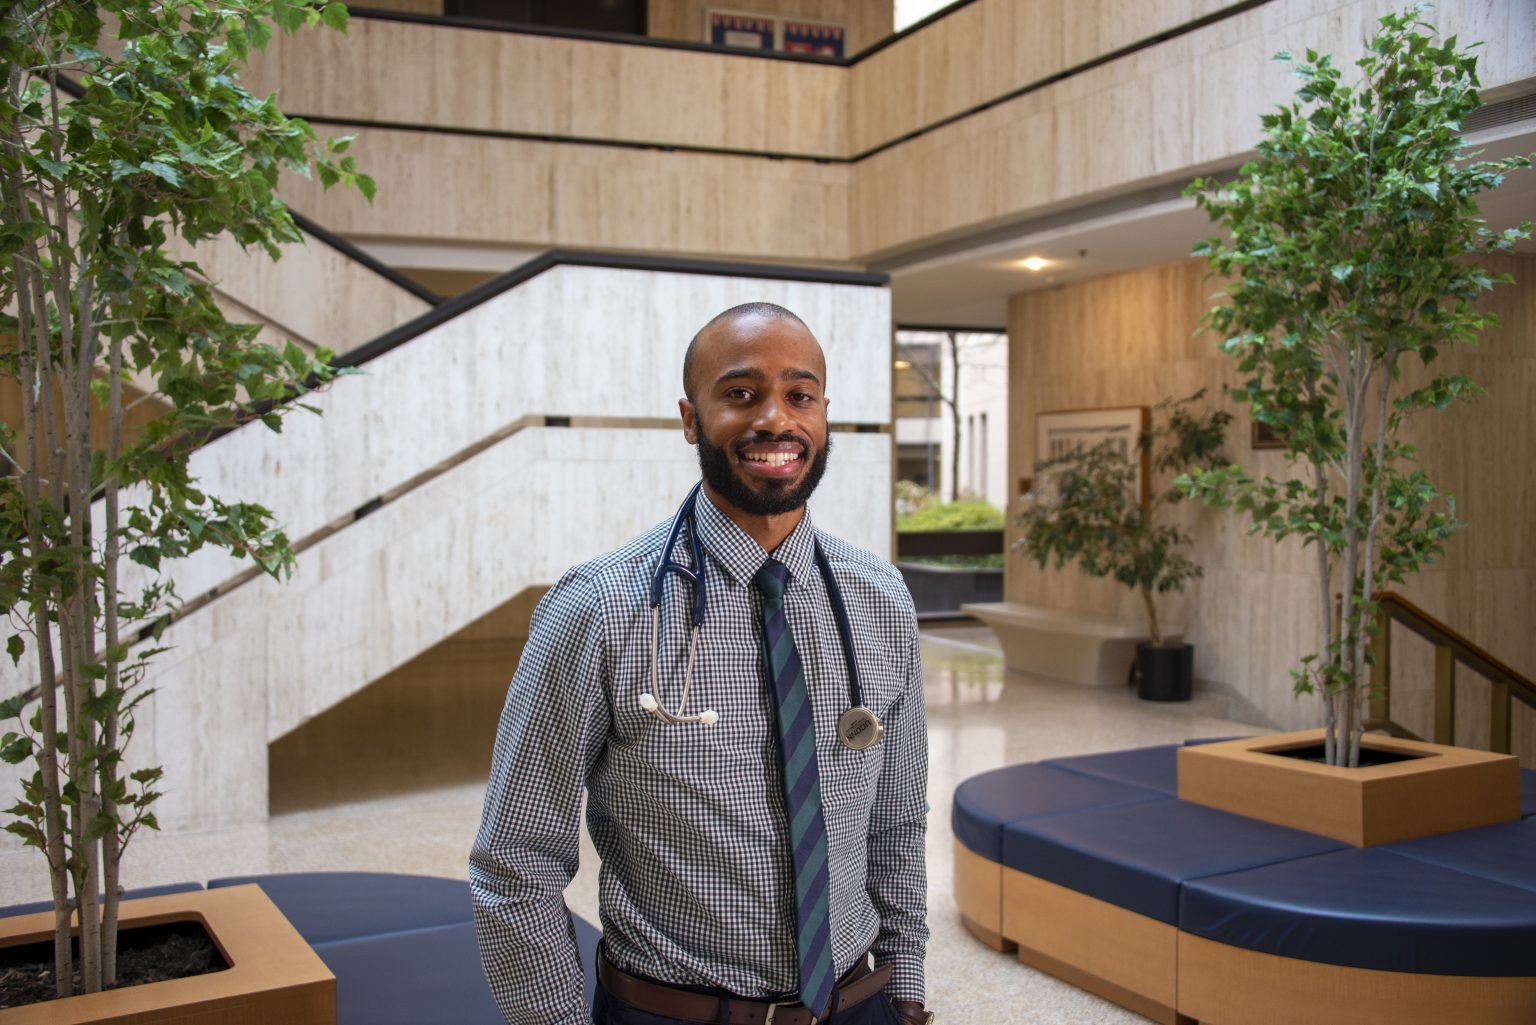 Suleiman Abiola holds a stethoscope gift given to each medical student by alumni from the UConn School of Medicine. November 23, 2020 (Tina Encarnacion/UConn Health photo)